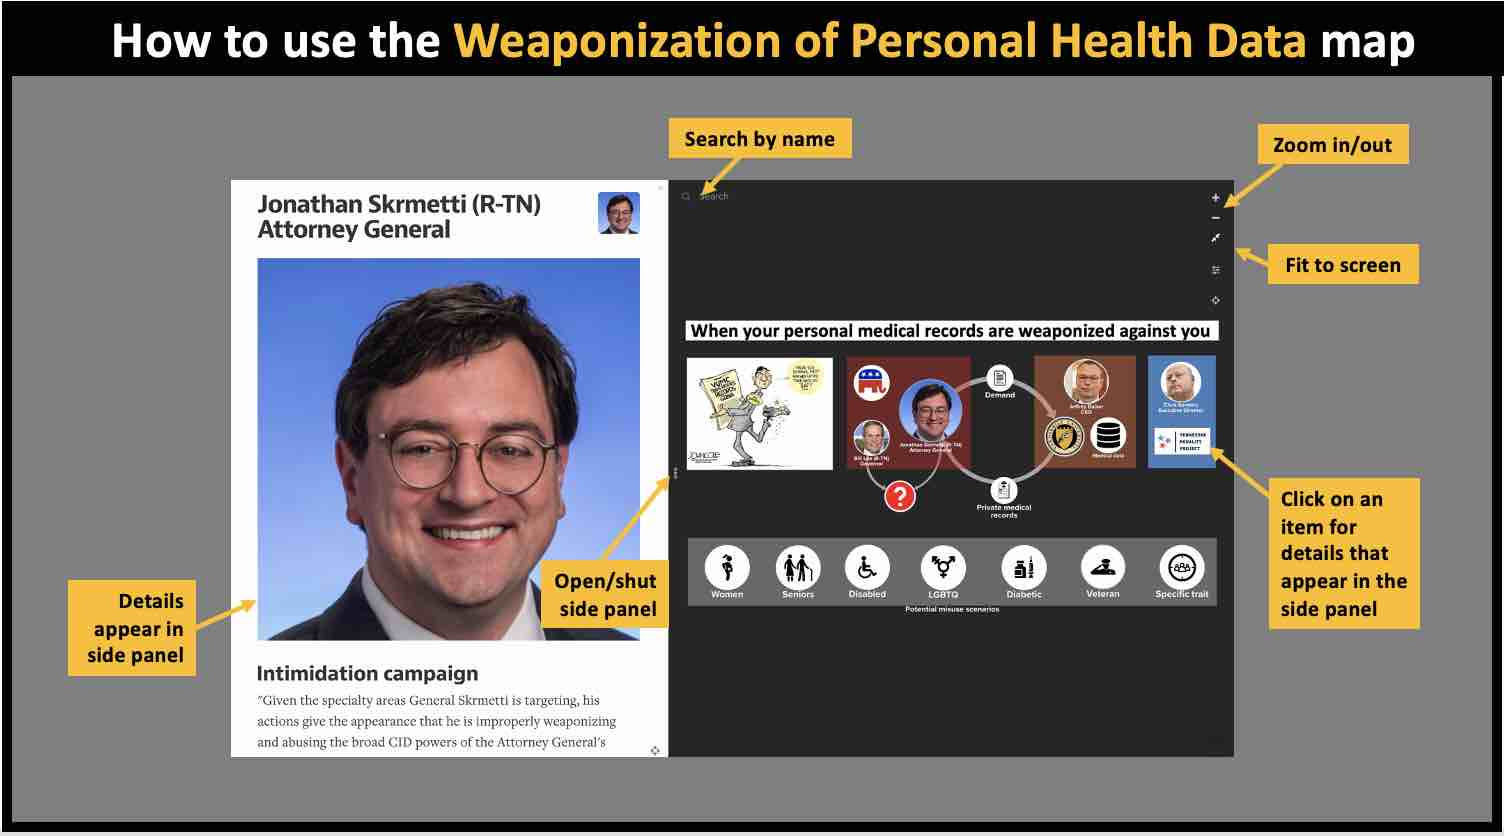 How to use the weaponization of Personal Health Data map